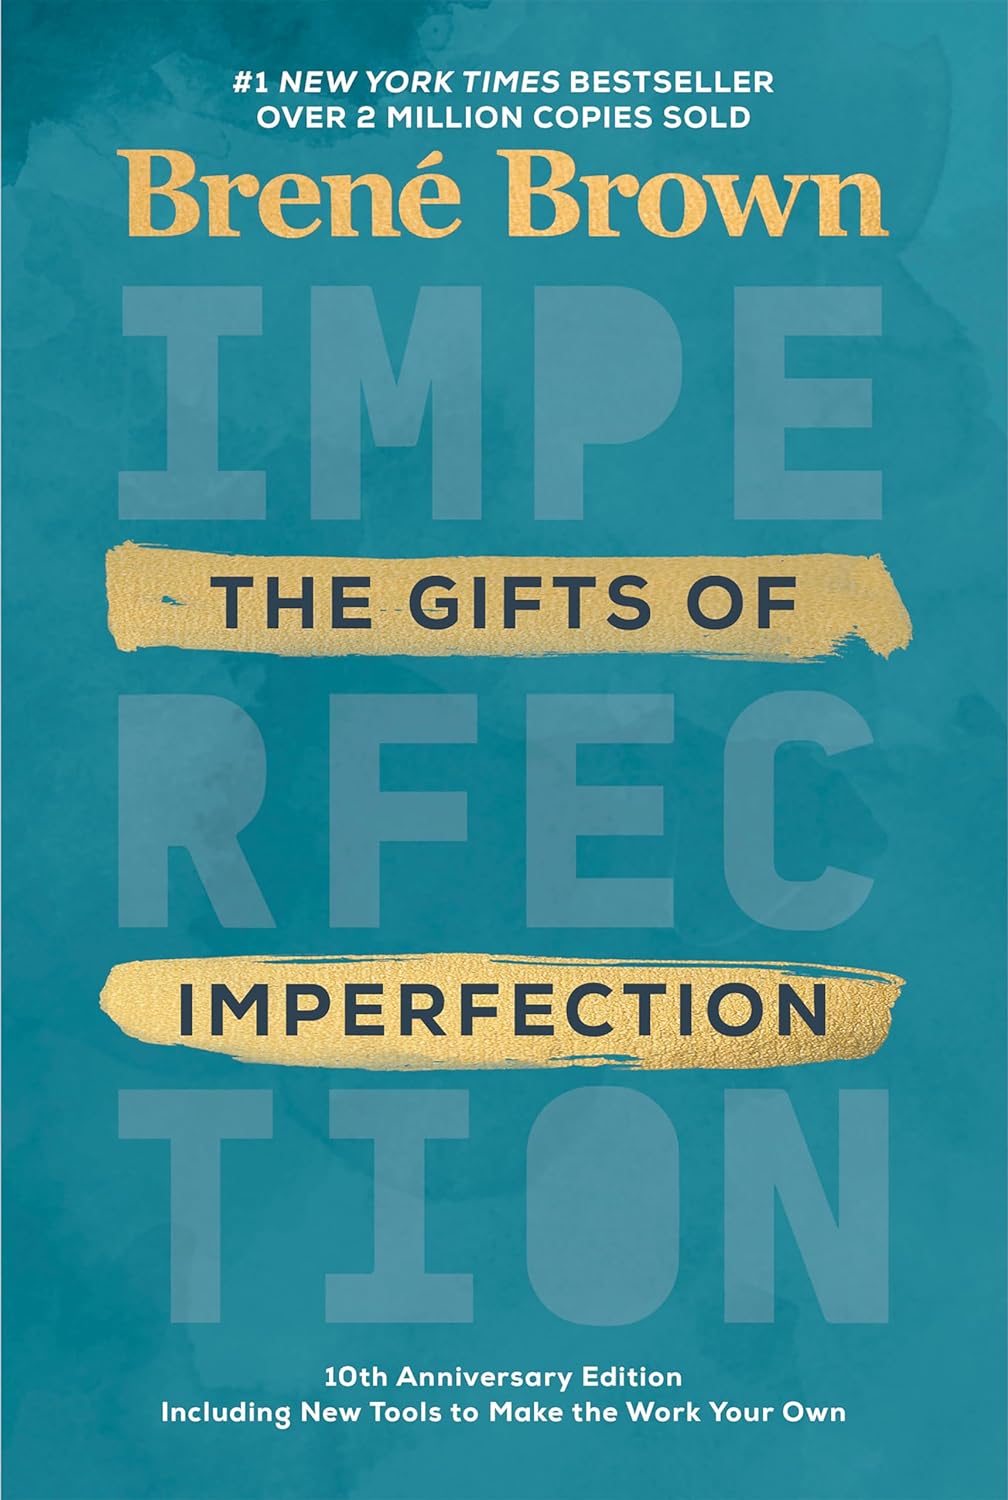 Renee Brown, The Gifts of Imperfection